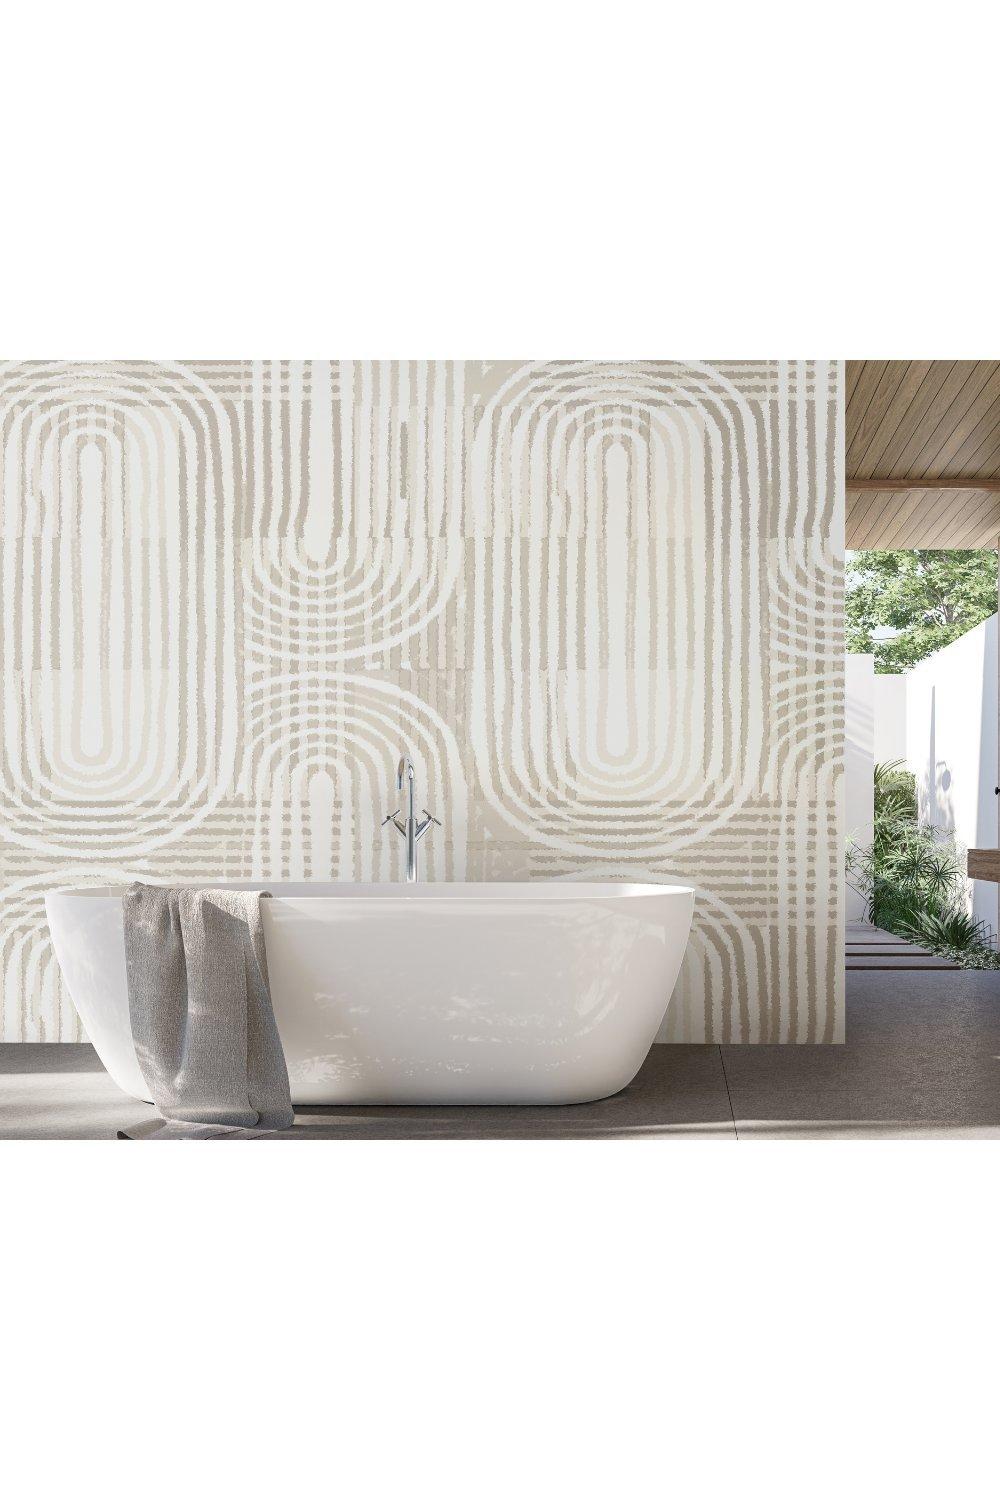 Curved Line Texture Wall Mural